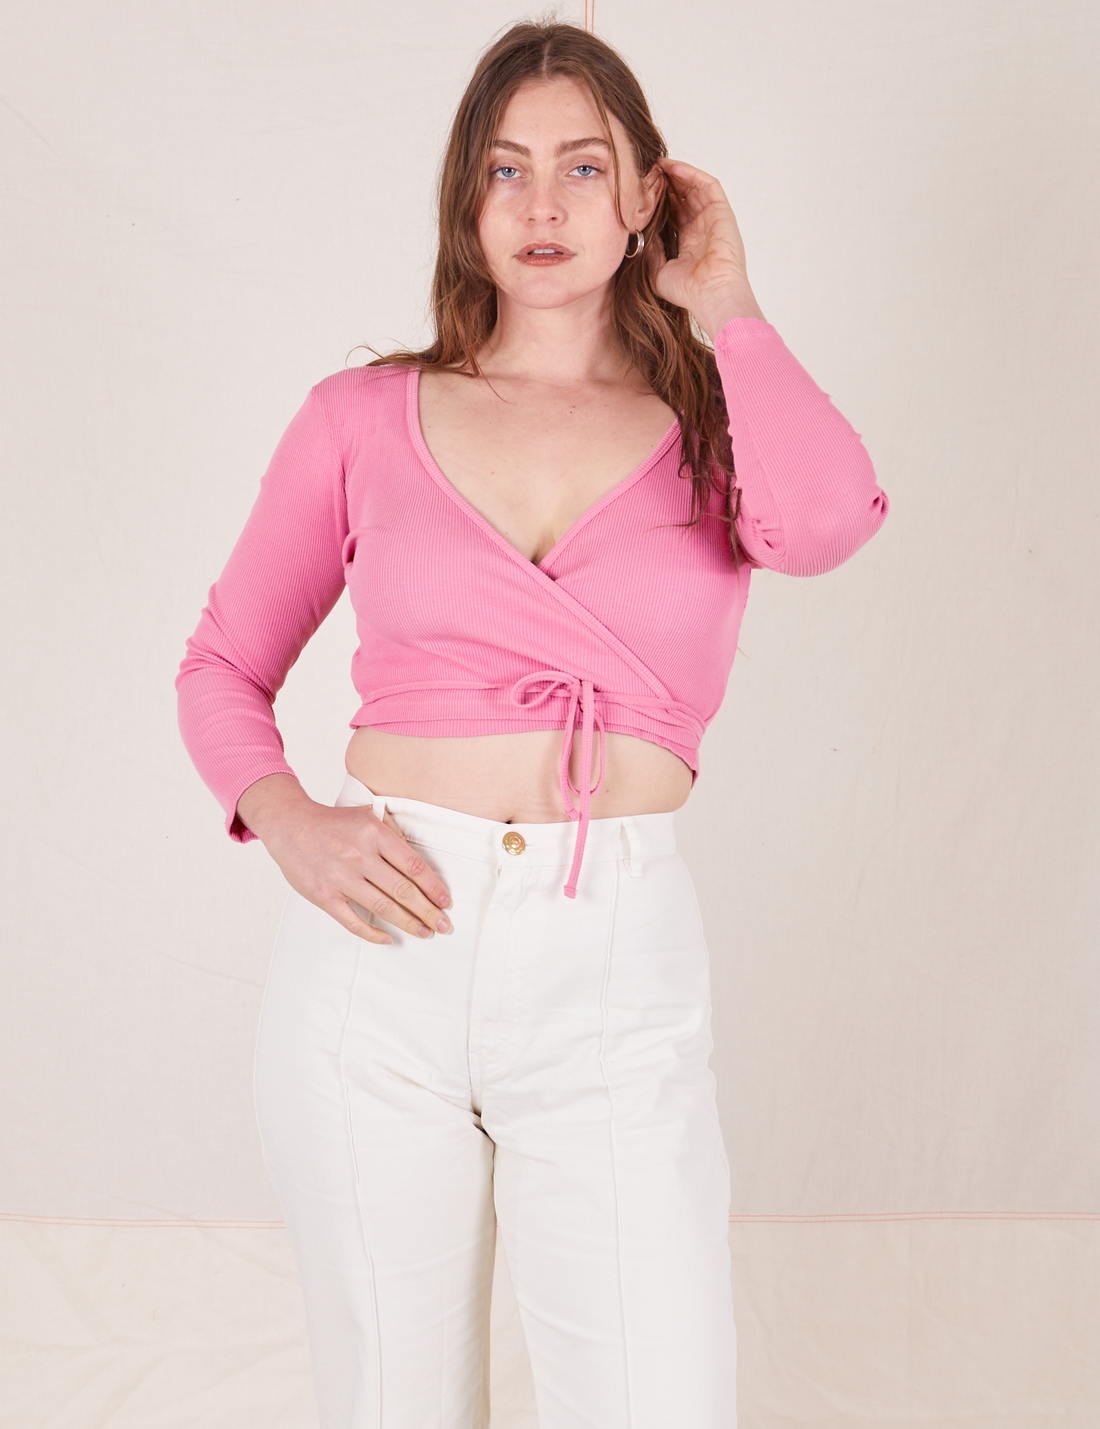 Allison wearing size 1 Wrap Top in Bubblegum Pink paired with vintage off-white Western Pants